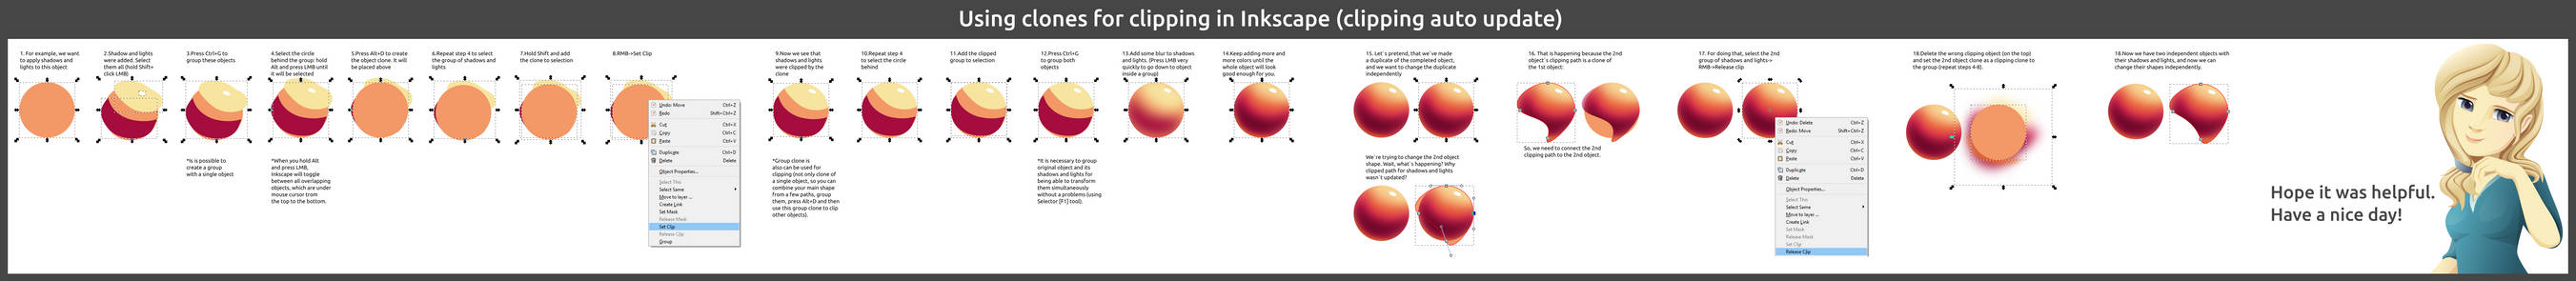 Inkscape - clipping with clones